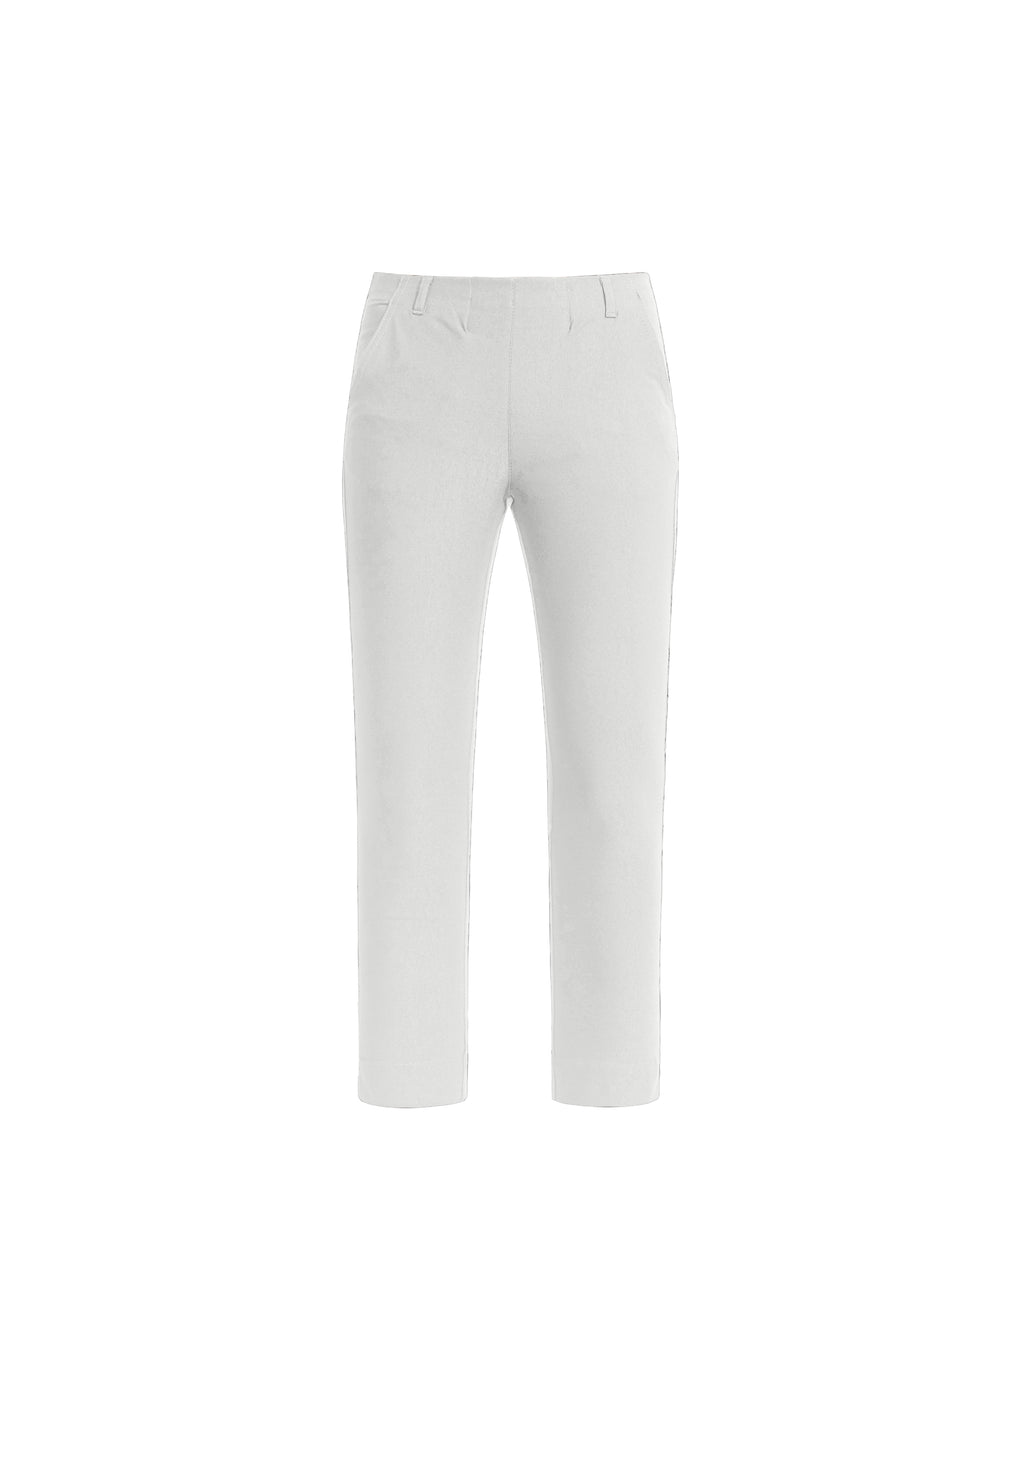 LAURIE Taylor Regular Crop Trousers REGULAR 10000 White